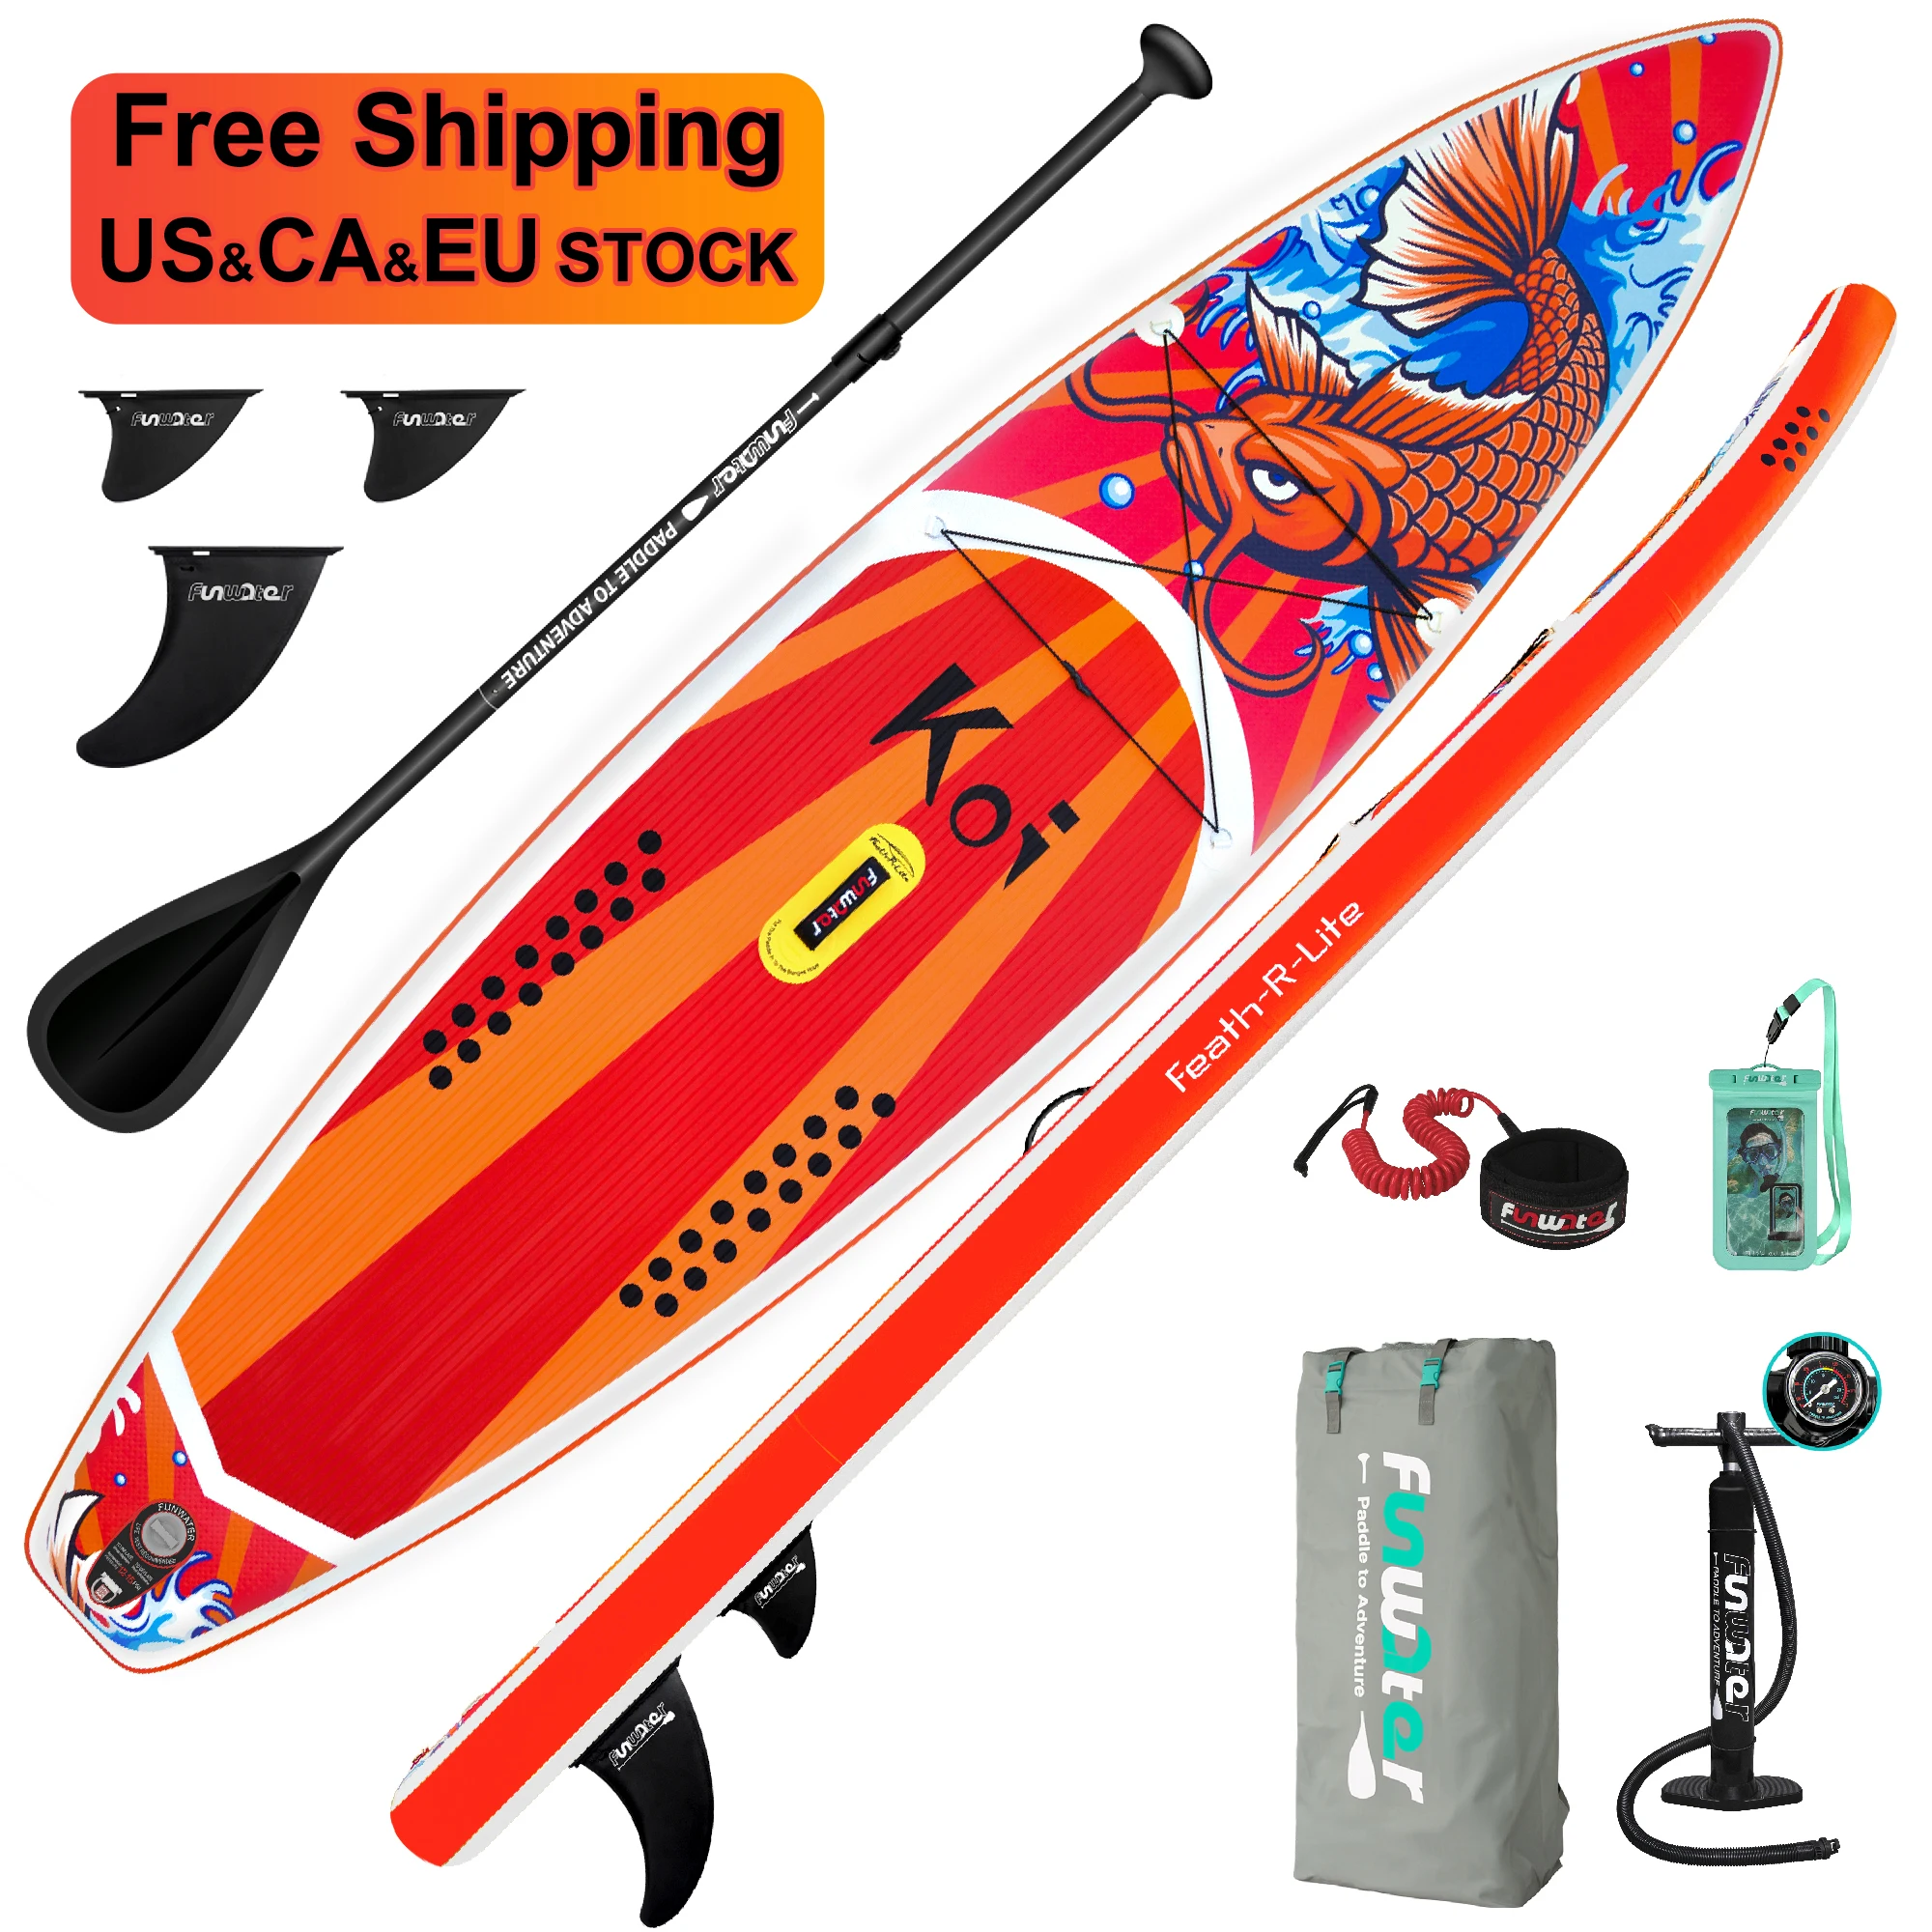 

FUNWATER Free Shipping Dropshipping OEM koi sup inflatable drop stitch standup paddle board surfboard surf sup boards supboard, Red